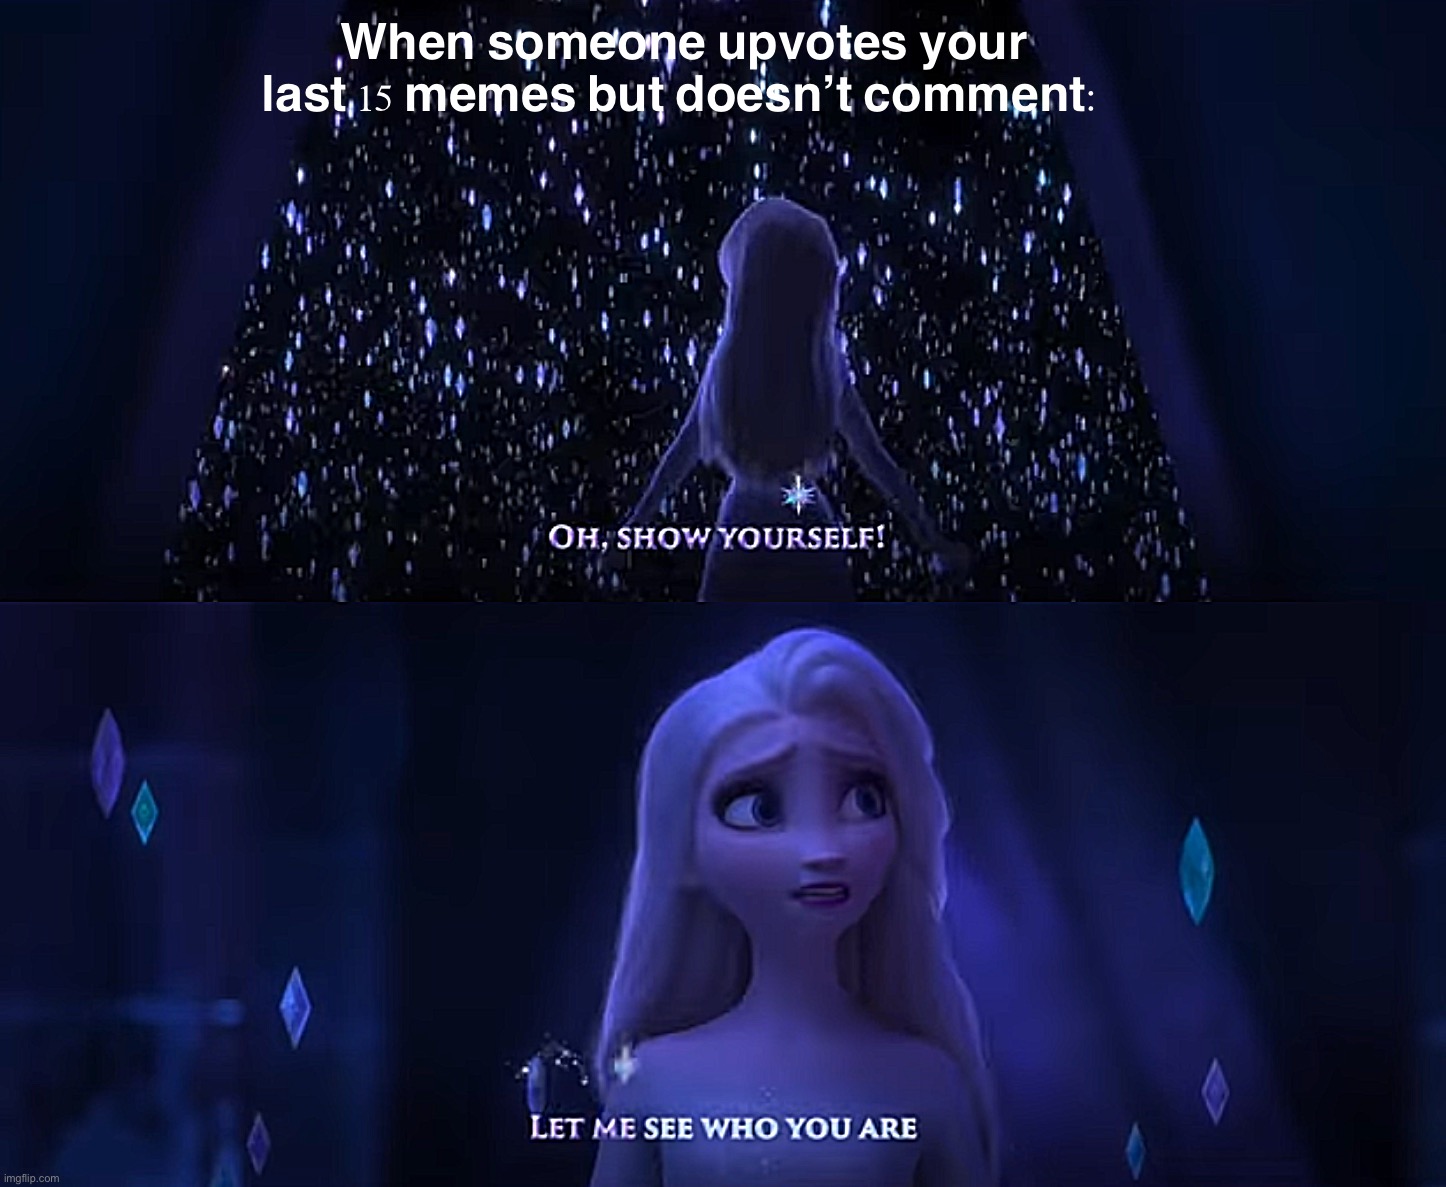 Imgflip Lurkers | When someone upvotes your last 15 memes but doesn’t comment: | image tagged in frozen show yourself,imgflip,lurkers,meanwhile on imgflip,first world imgflip problems,the daily struggle imgflip edition | made w/ Imgflip meme maker